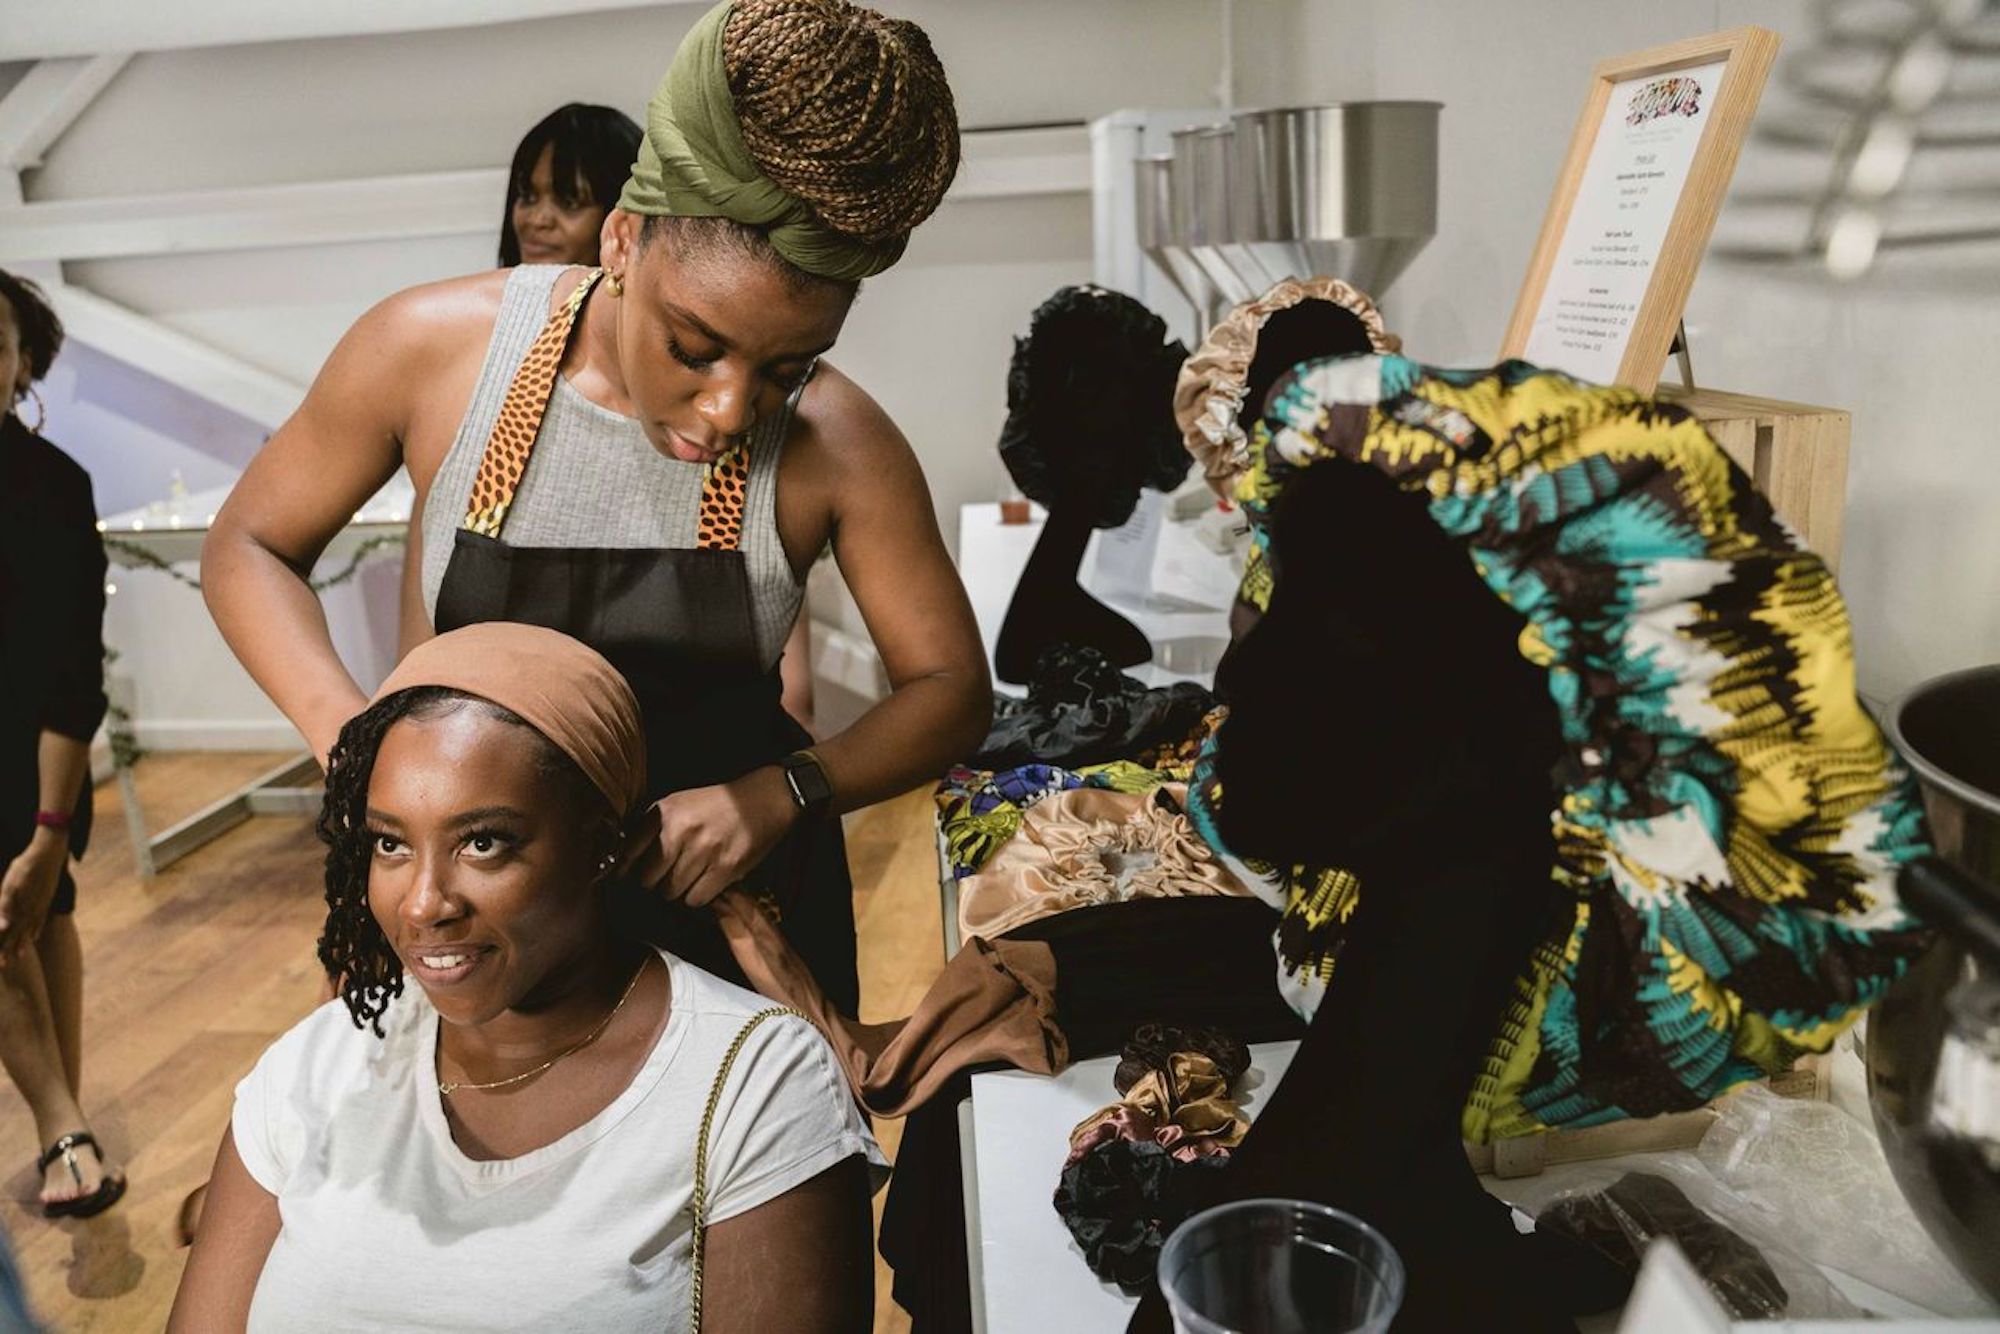 Yeye Mi, a self-care brand showcasing tools and accessories for afro-curly textured hair at a Jamii-Airbnb event last Christmas.